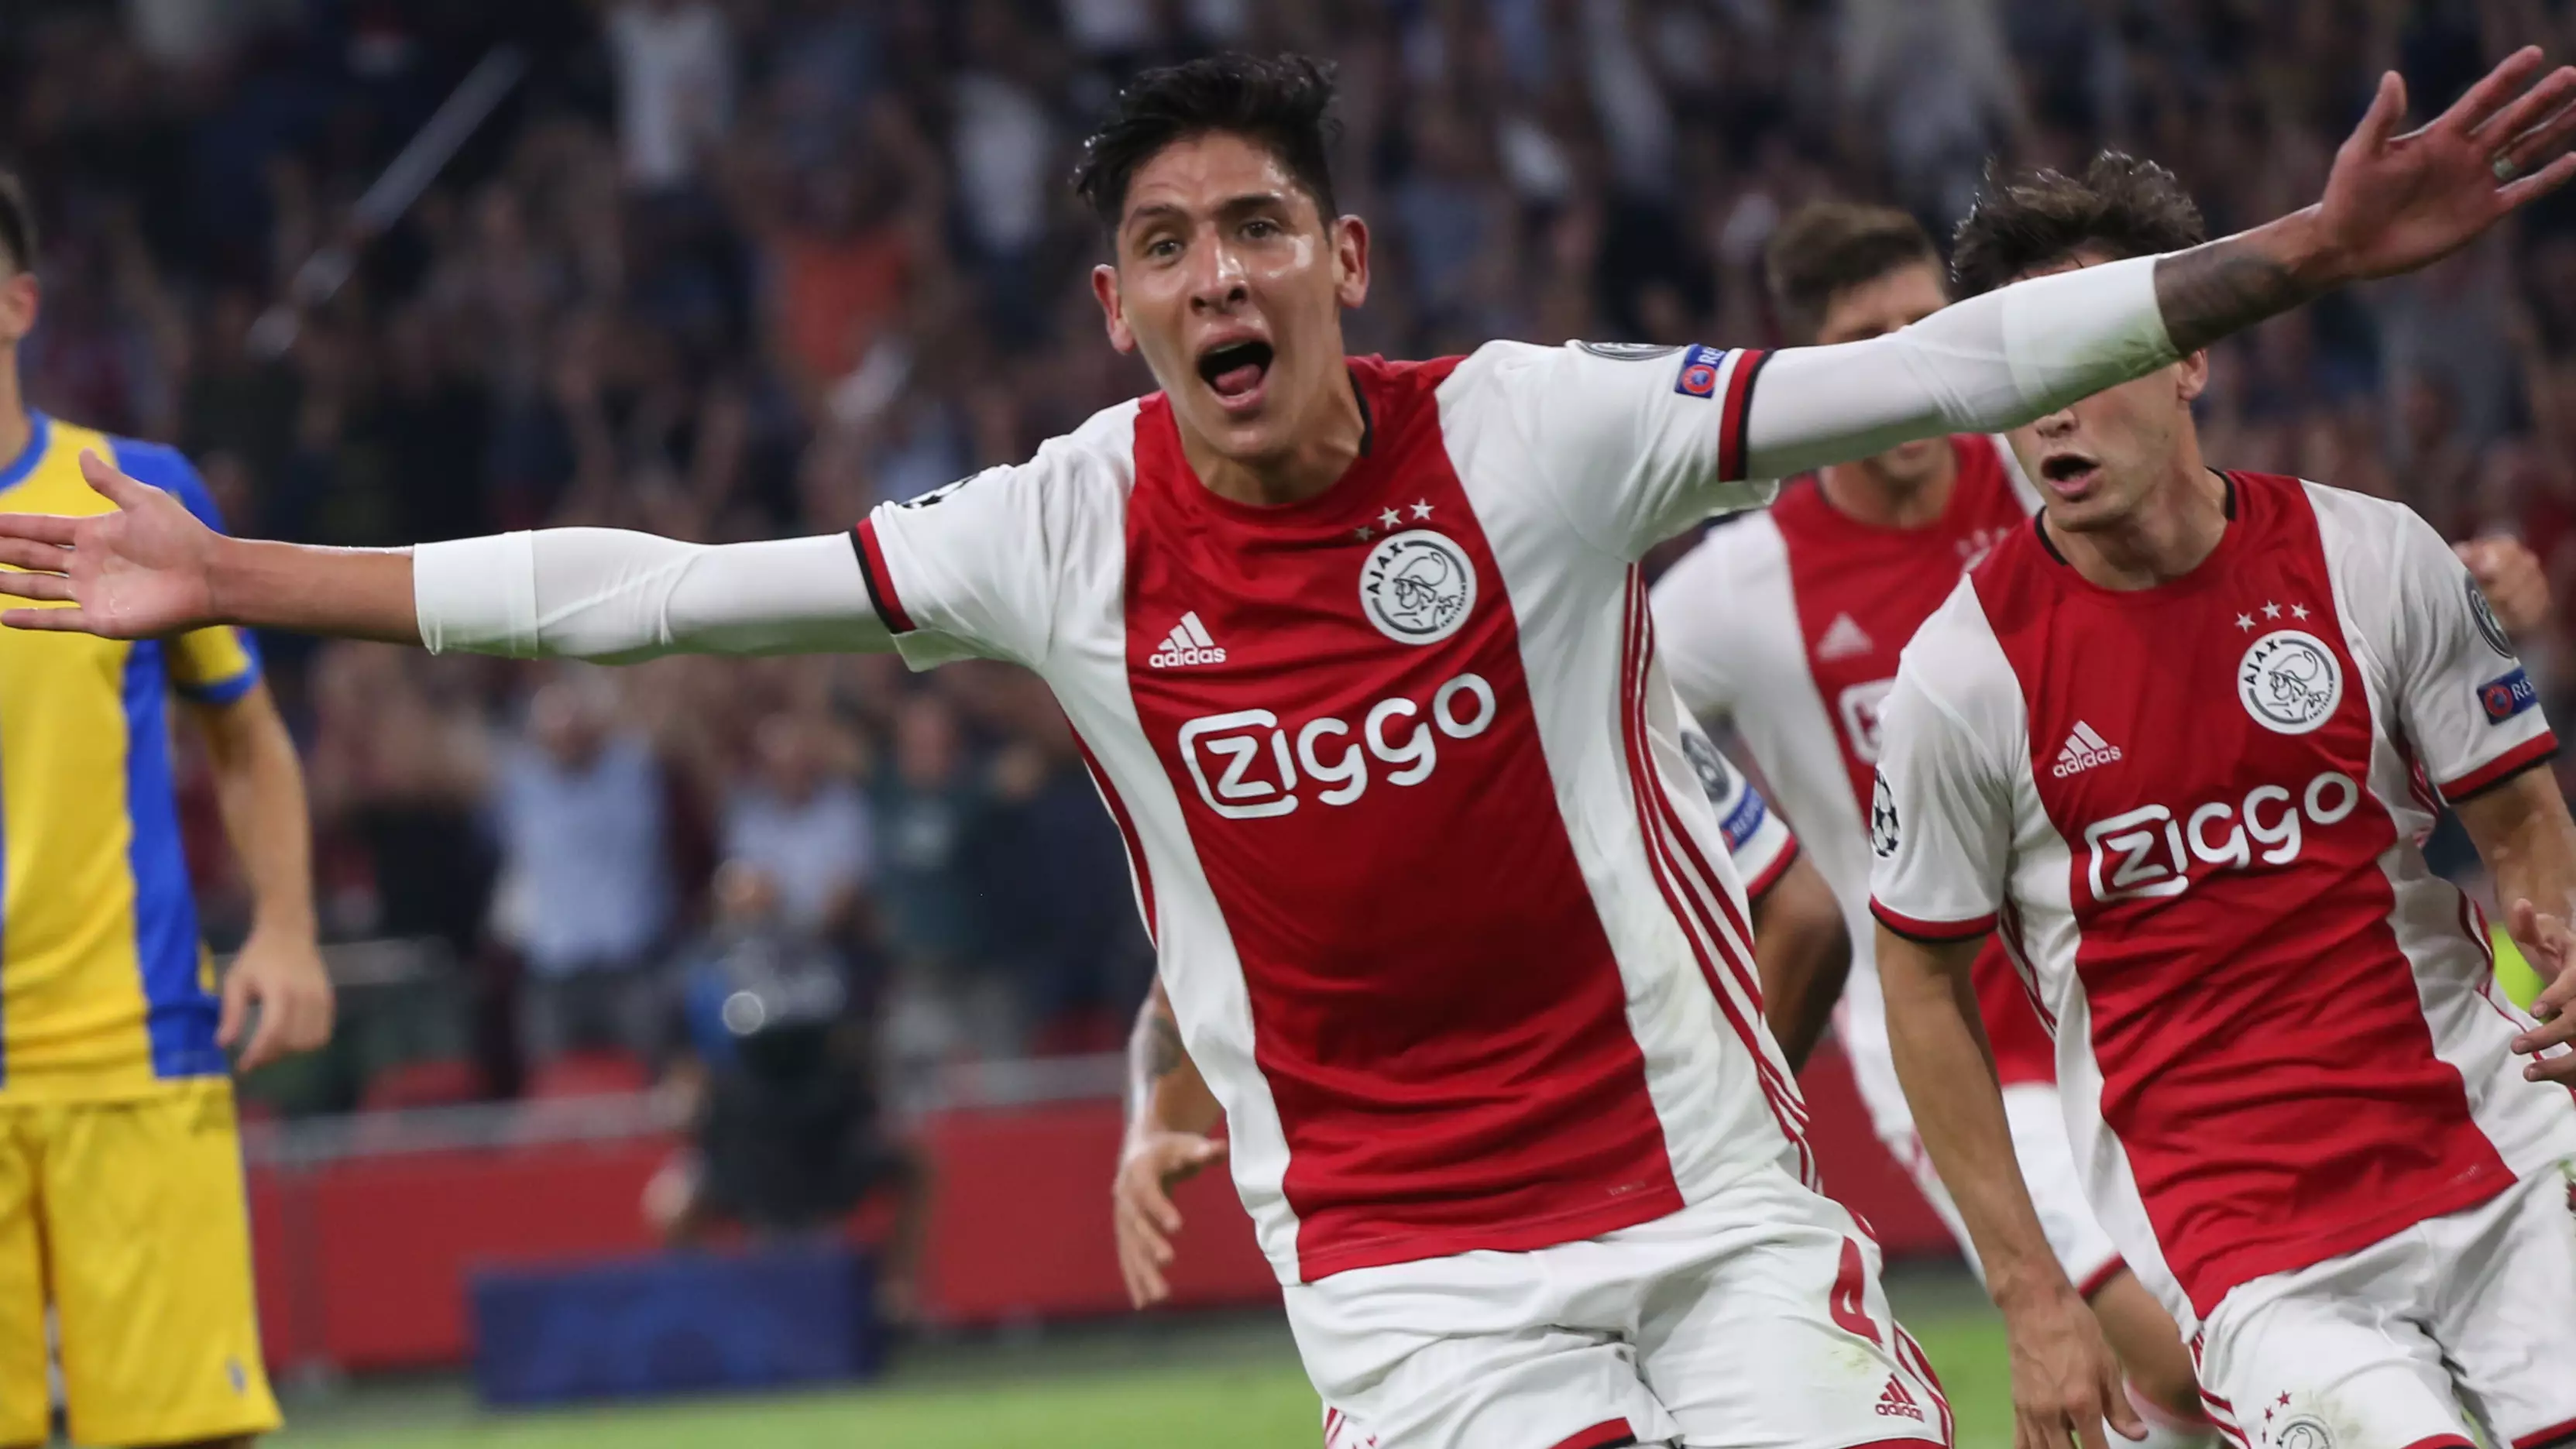 Ajax Vs Lille: LIVE Stream And TV Channel Info For Champions League Clash In Amsterdam